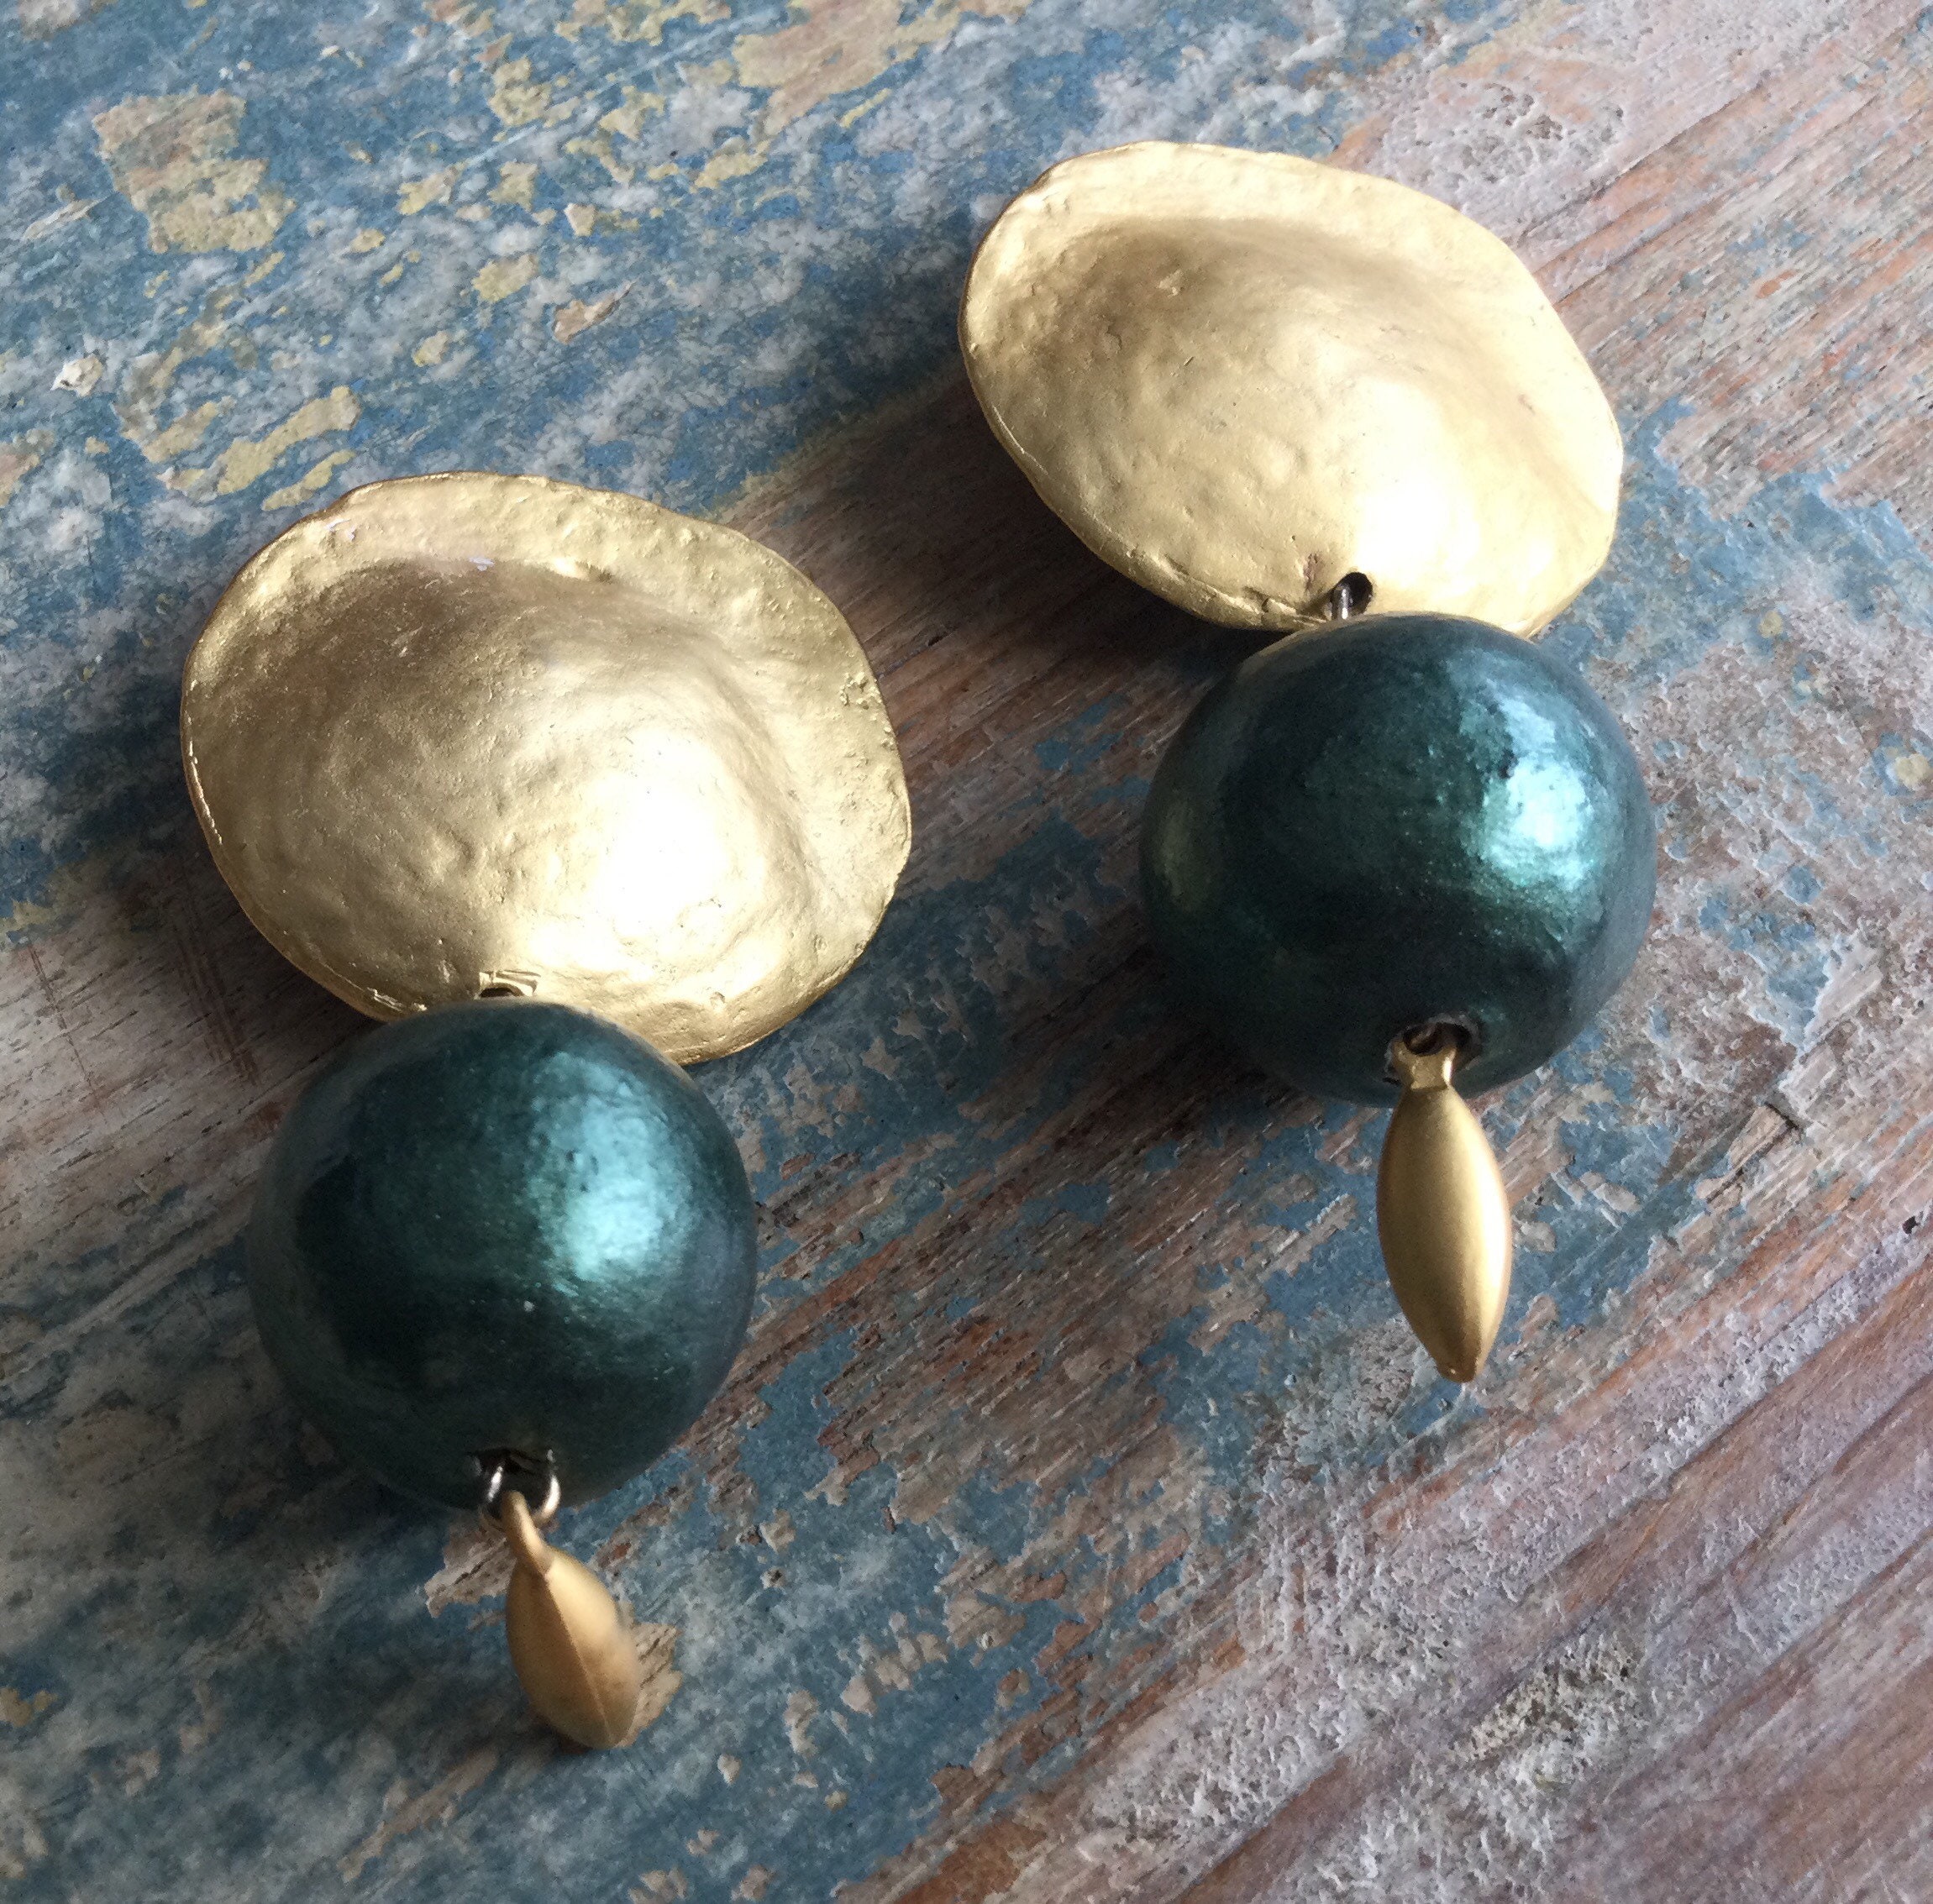 3” Long BIG Brushed Gold Discs Runway Statement Clip On Drop Dangle Iridescent Green Bead Earrings Set Vintage Costume Jewelry Fashion Lot